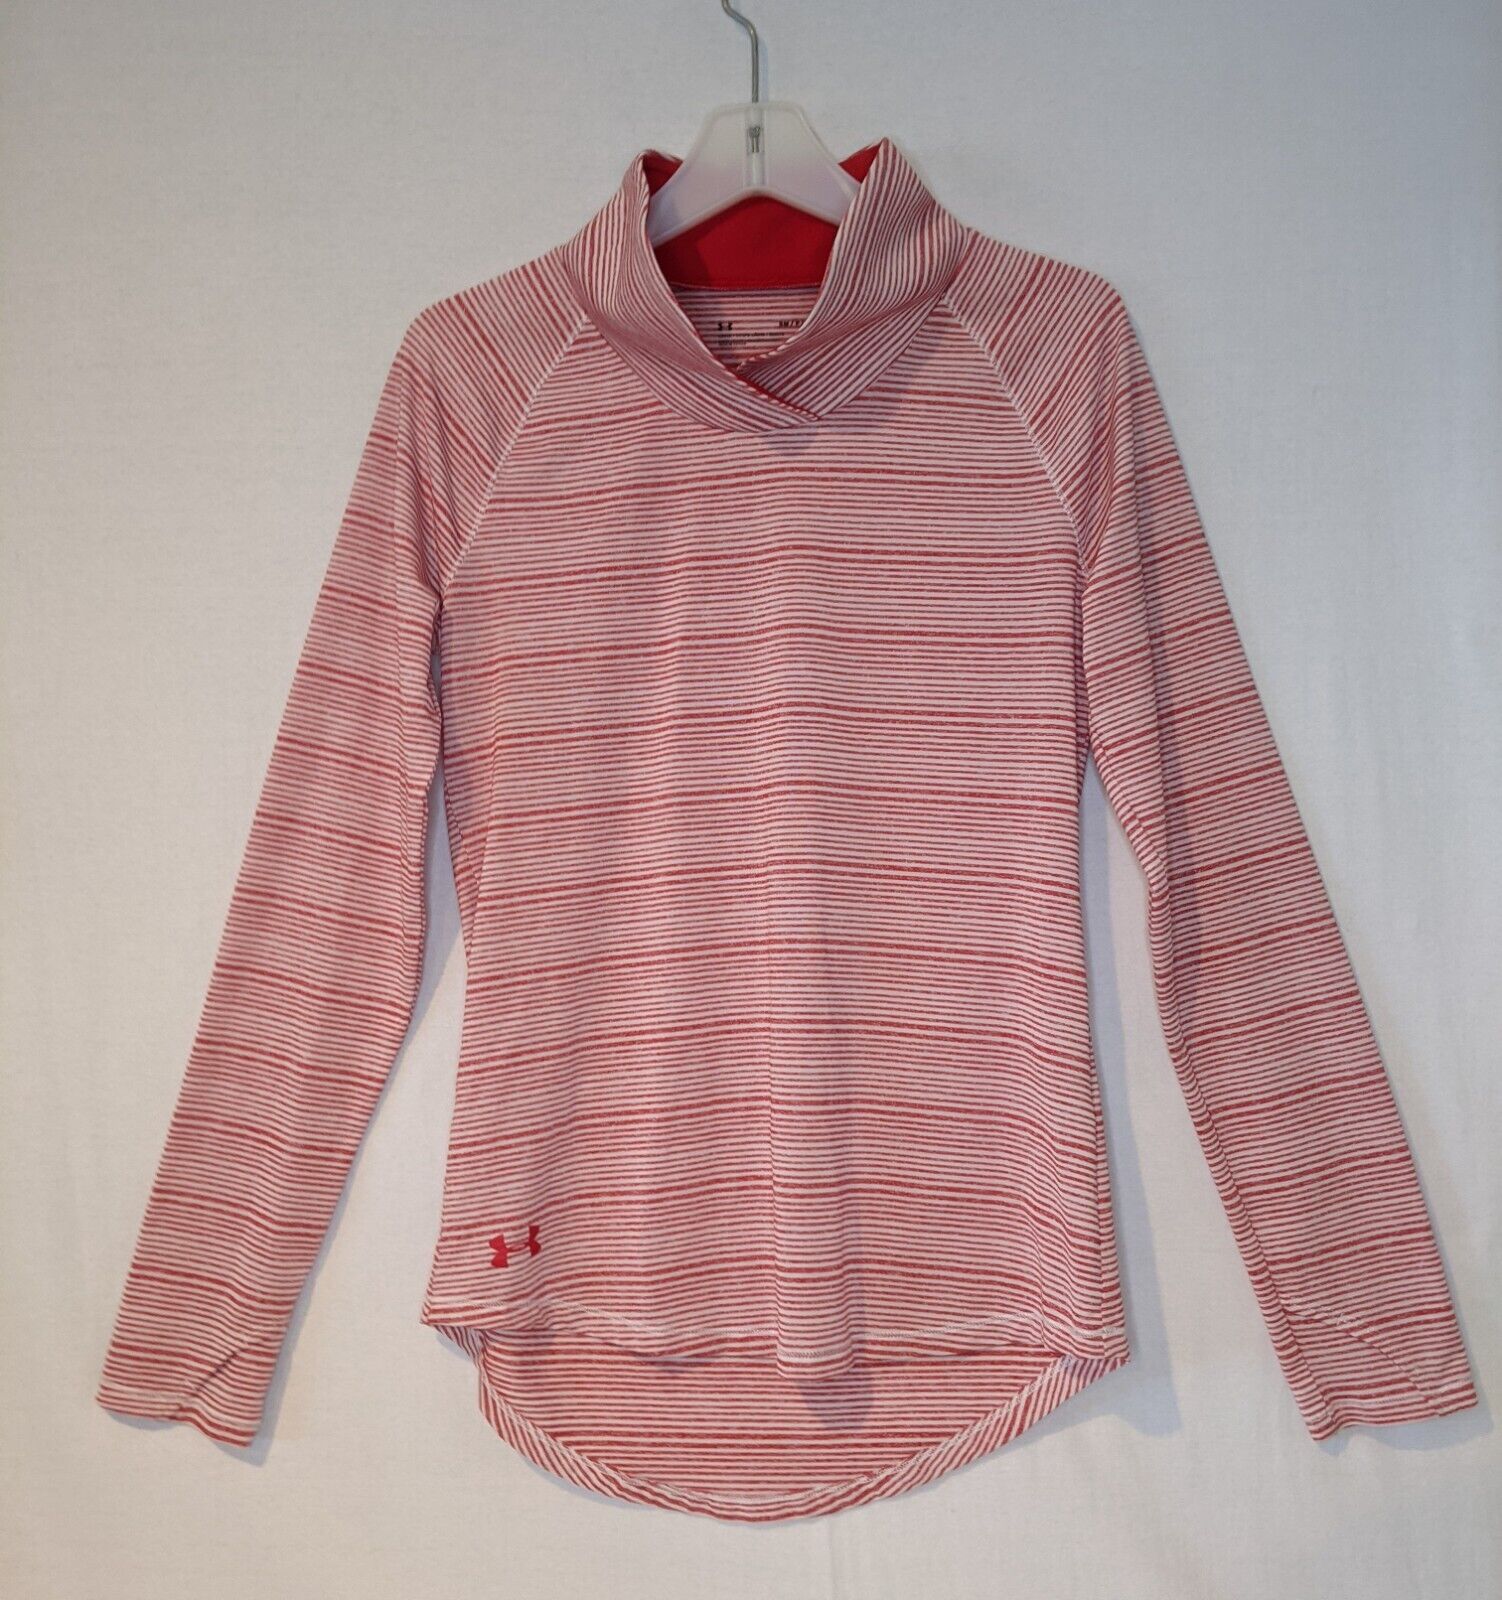 Under Armour Women’s Loose Red Long Sleeve Shirt Size Small RN96510 Thumb Holes